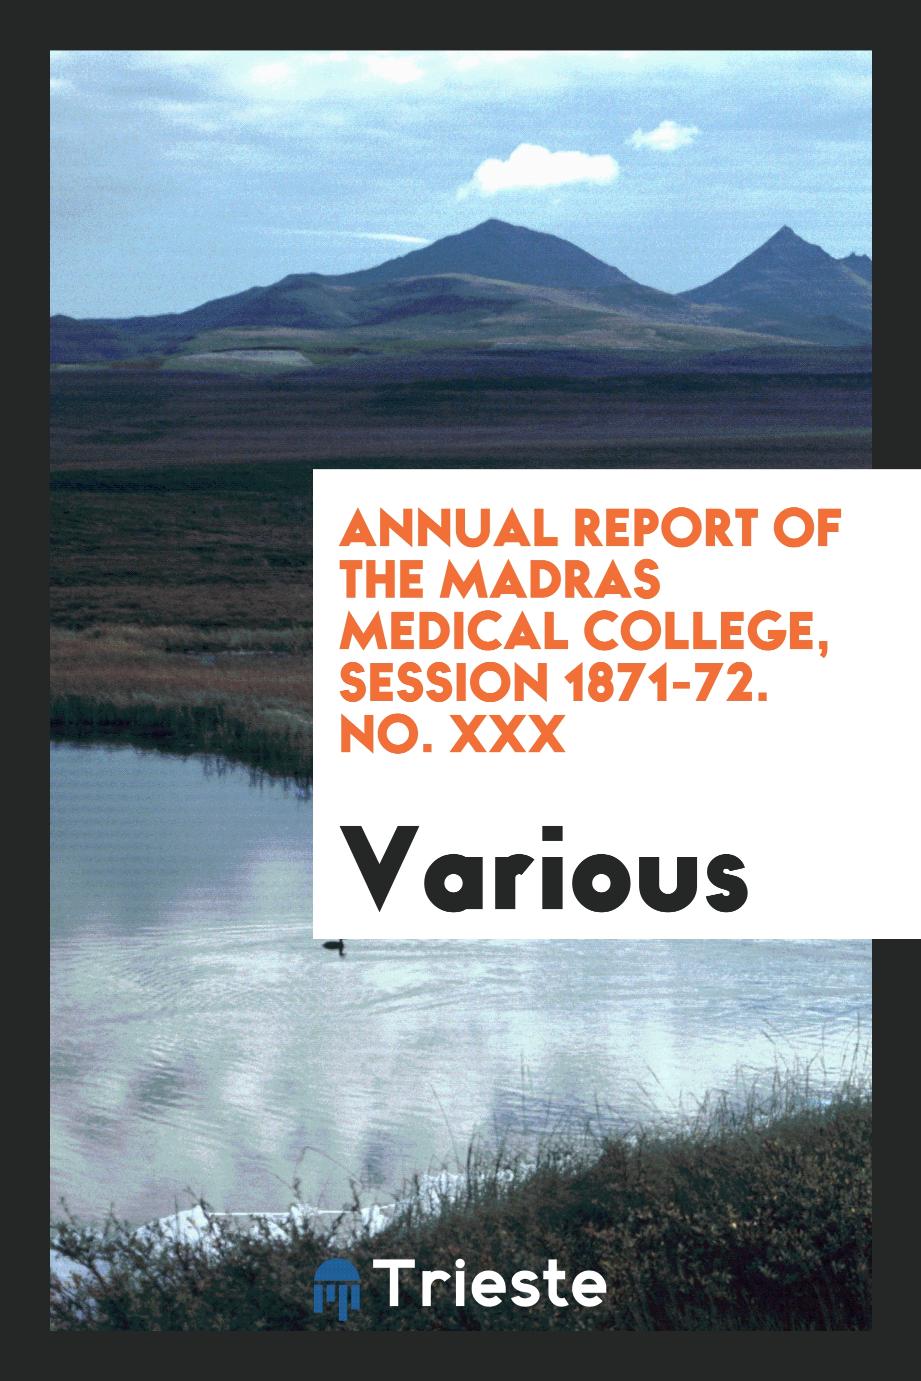 Annual report of the Madras Medical College, session 1871-72. No. XXX